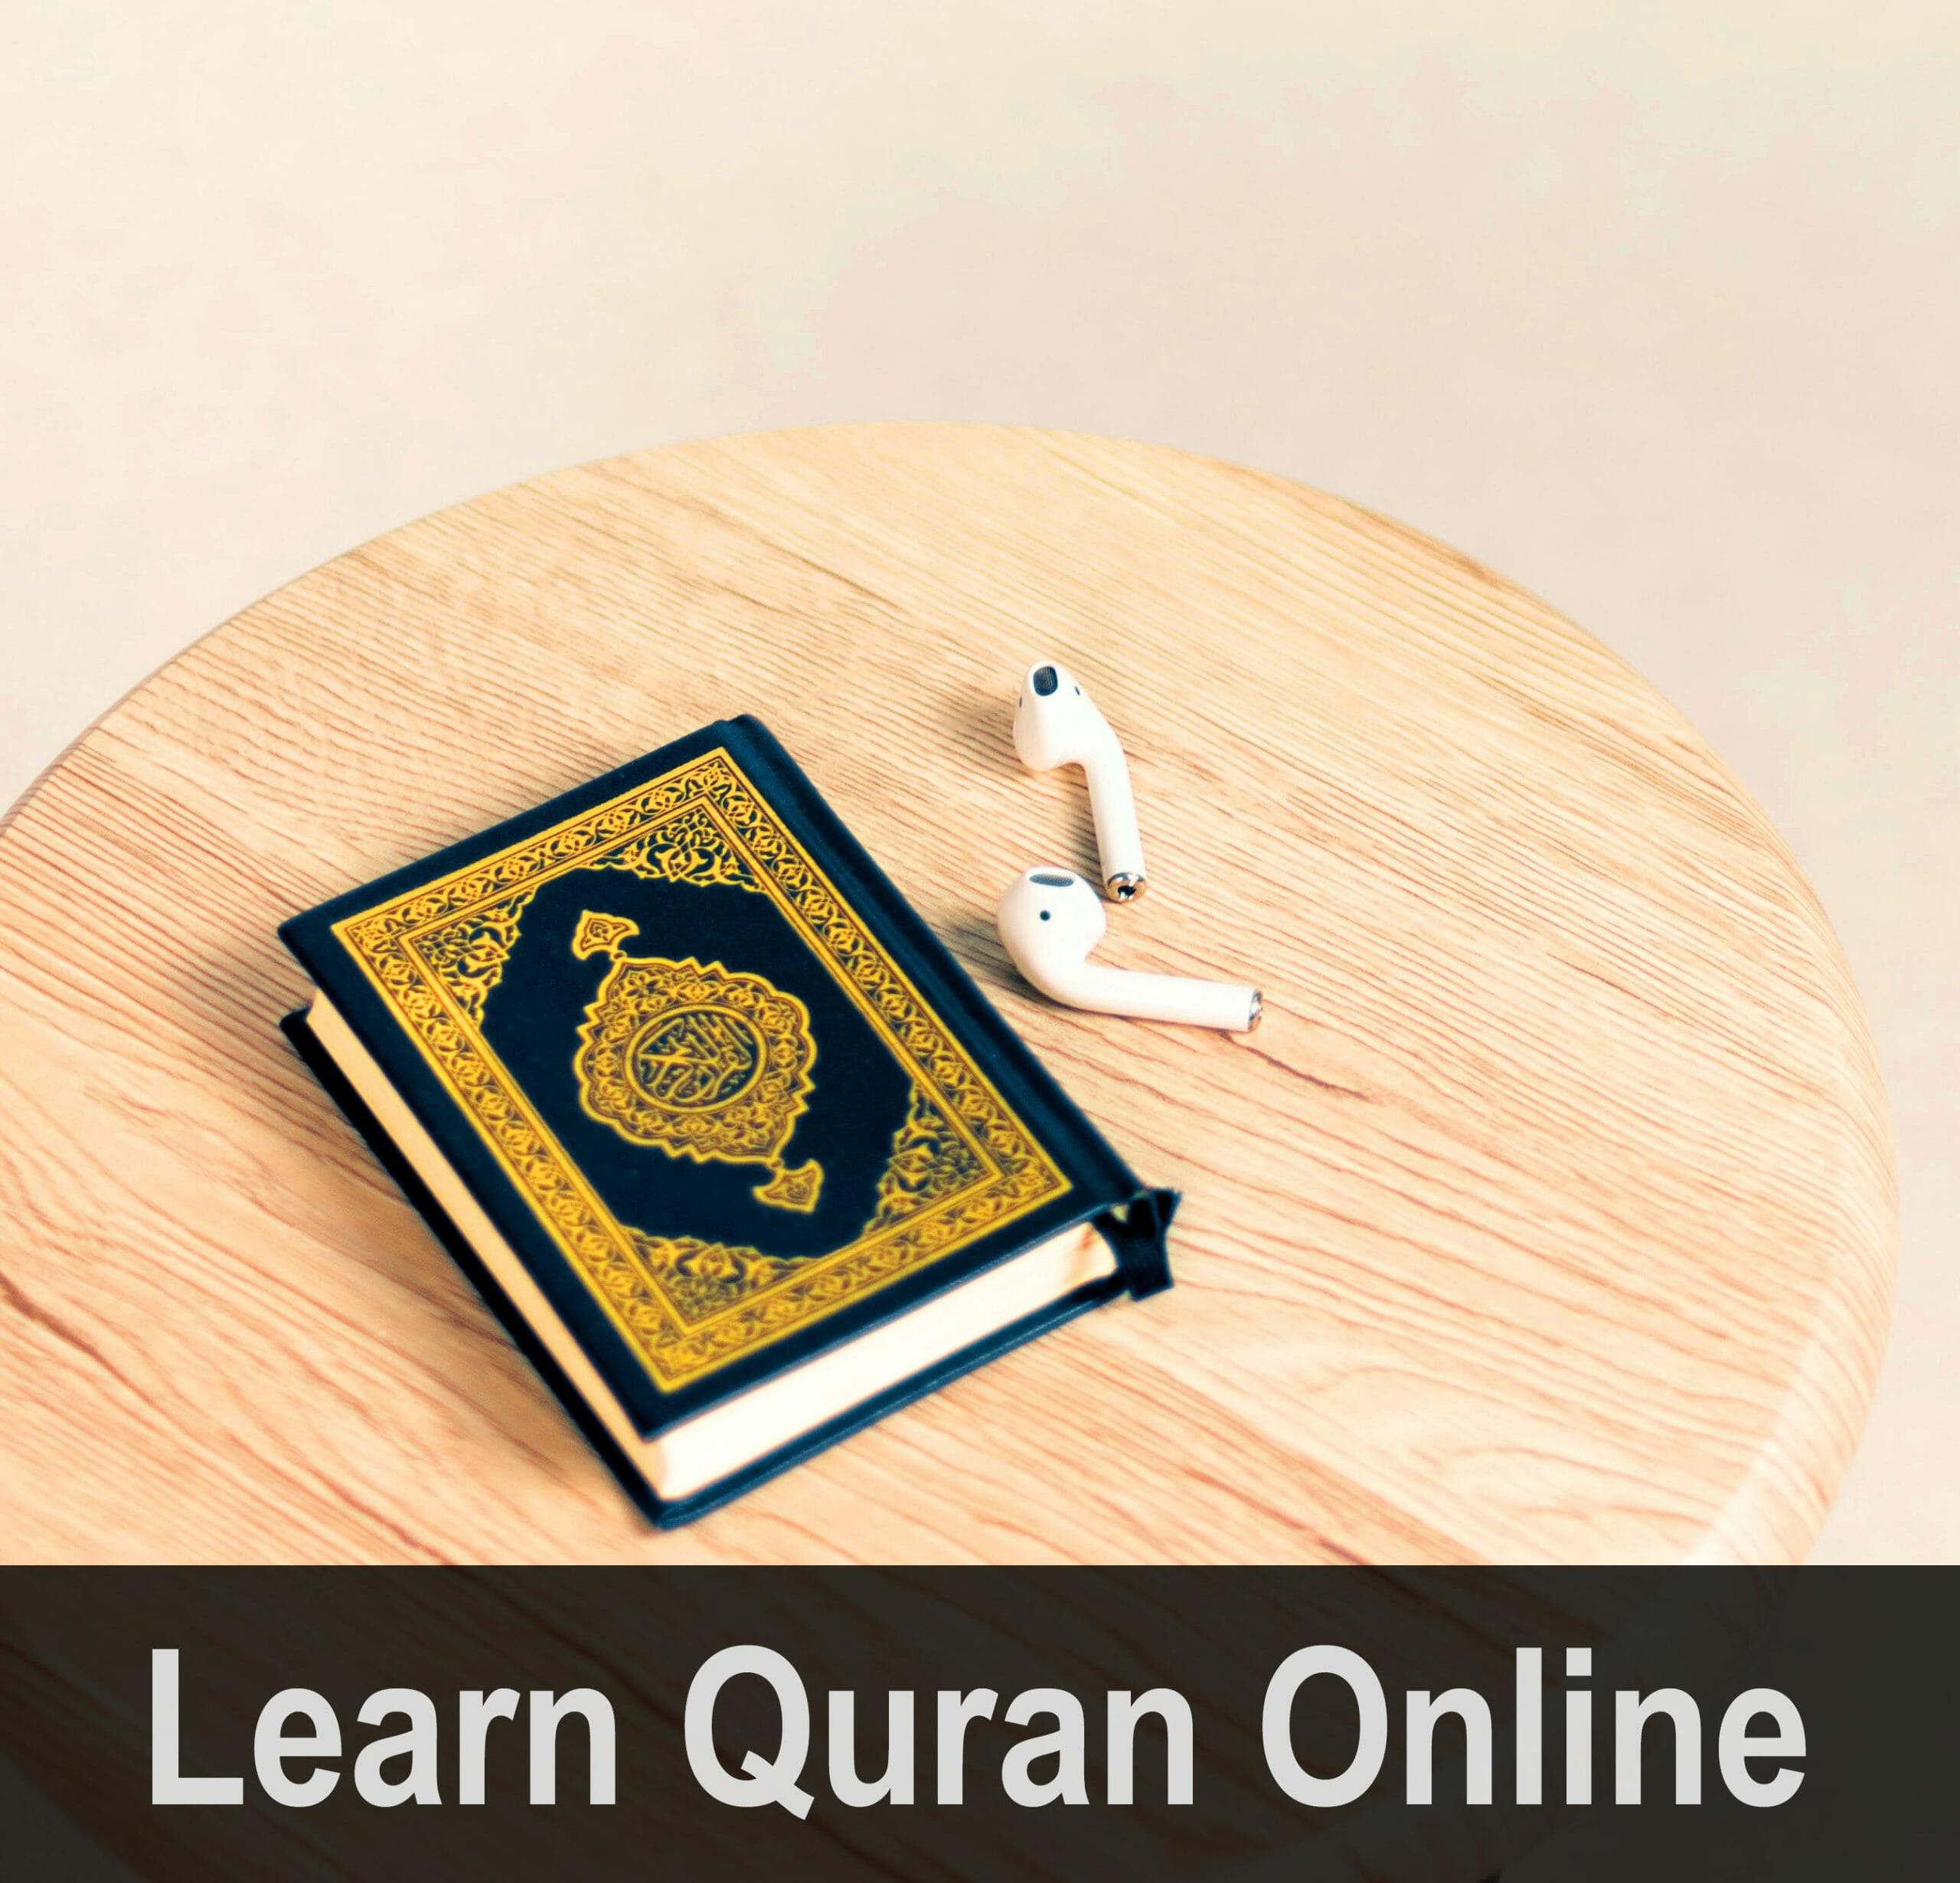 Quran learning courses online